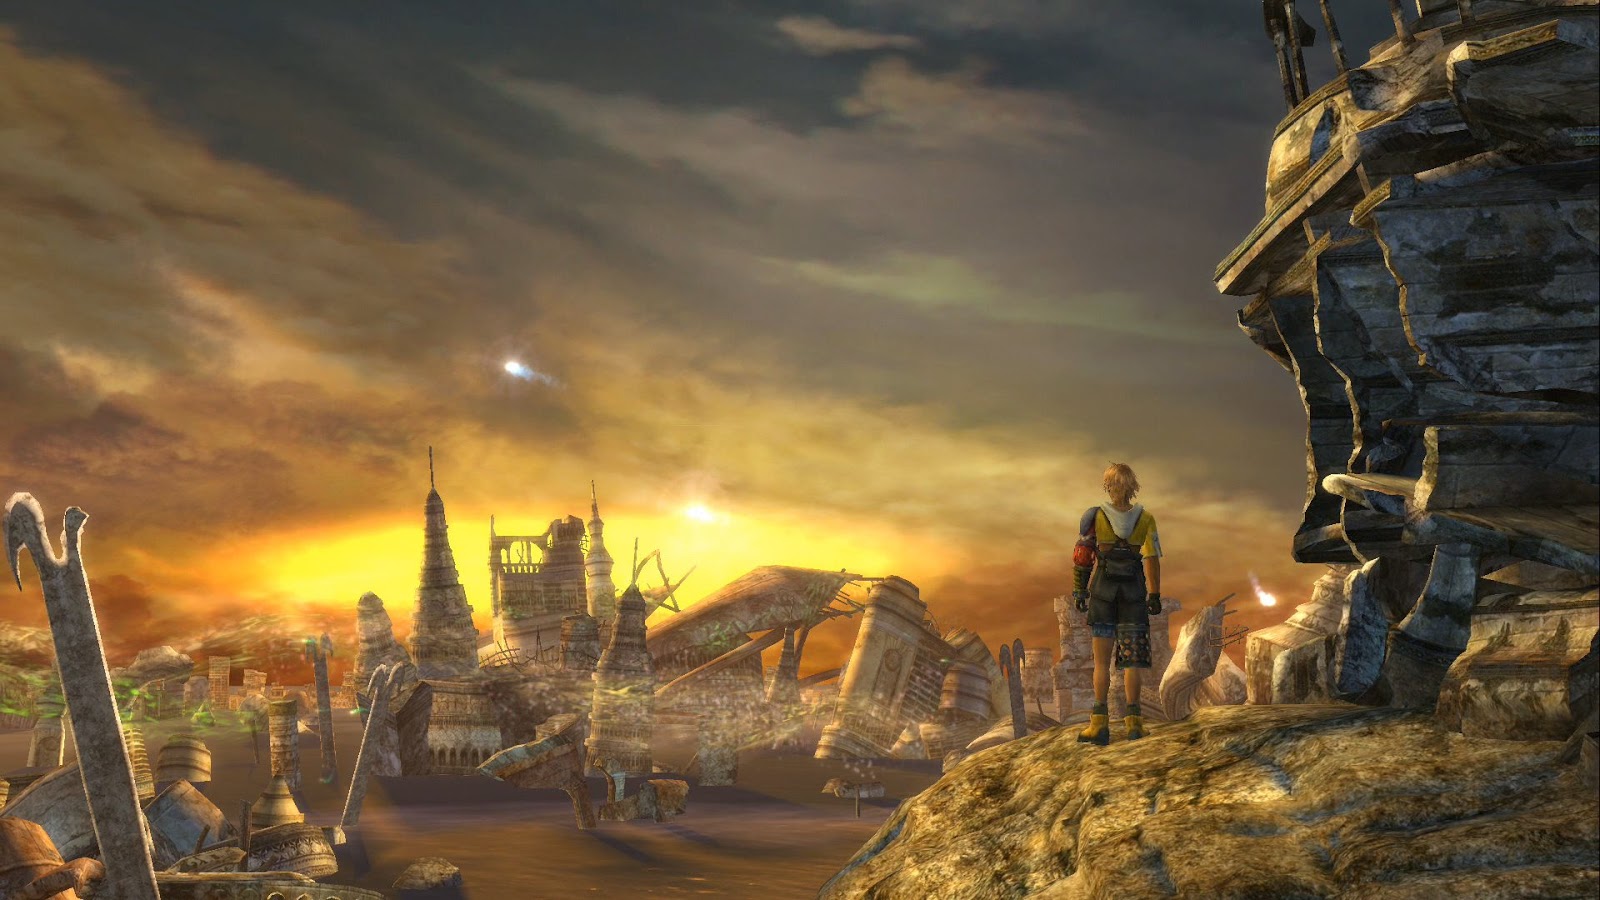 The Wertzone Final Fantasy X And X Ii To Be Released This Week On Steam